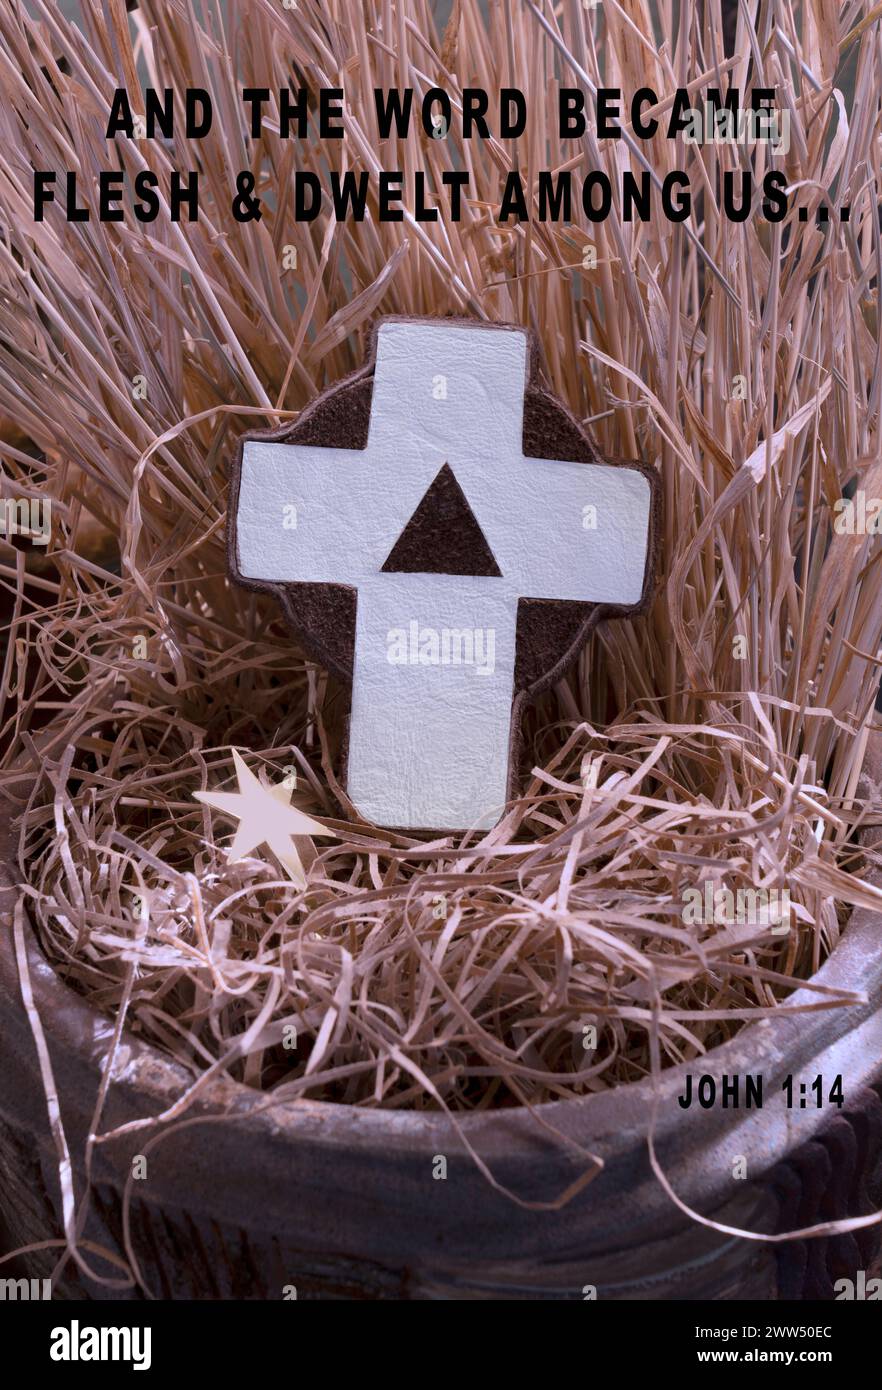 Christians believe 'the word became flesh' John1:14. Jesus born, died, & arose from the dead to give everlasting life to all. See White empty cross. Stock Photo